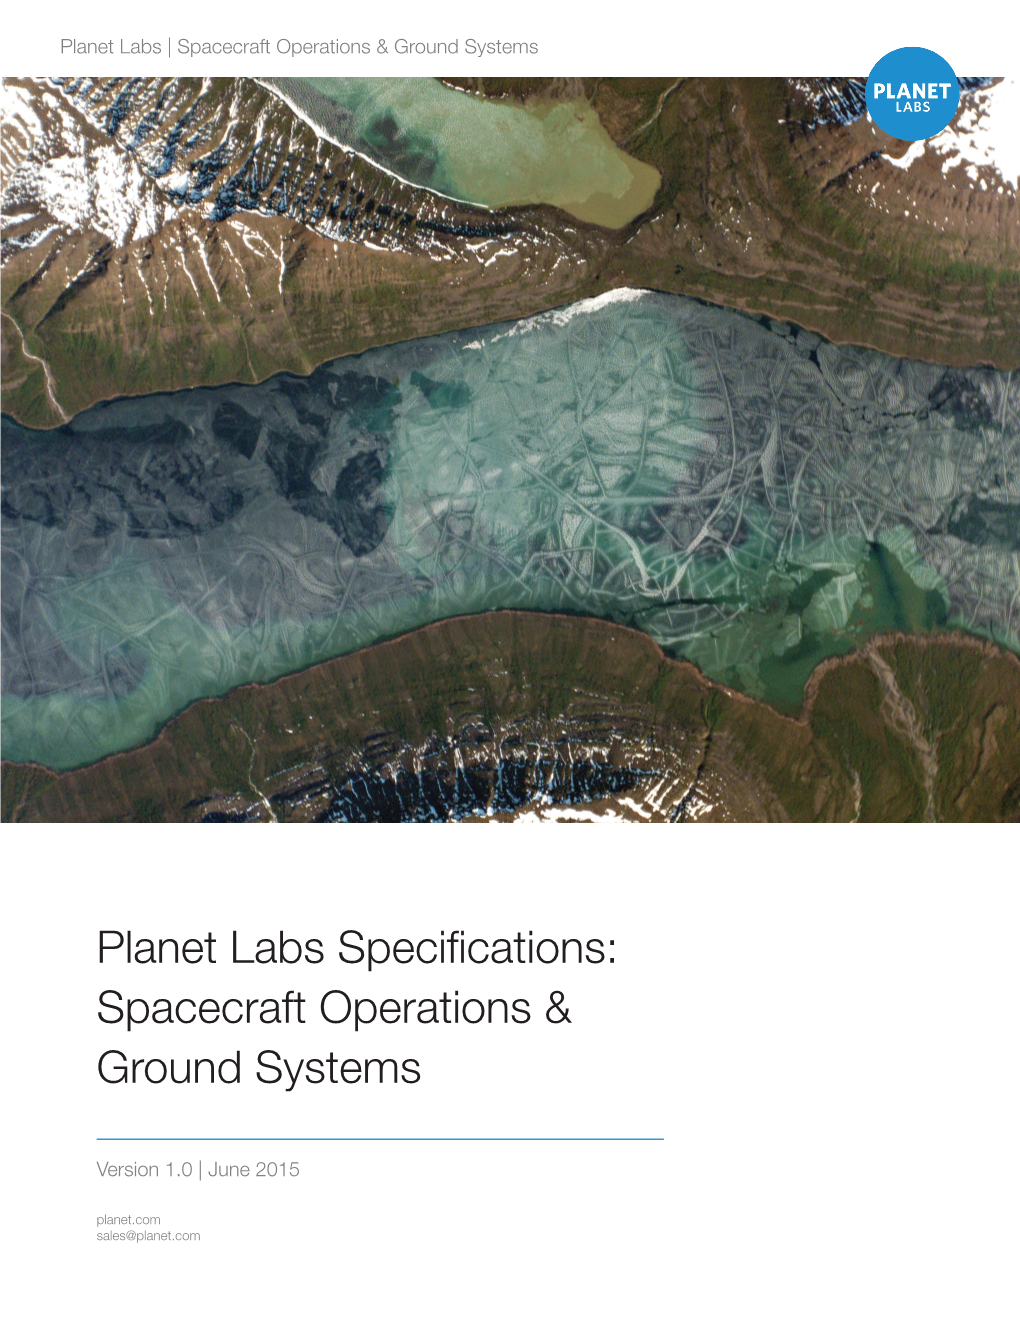 Planet Labs Specifications: Spacecraft Operations & Ground Systems